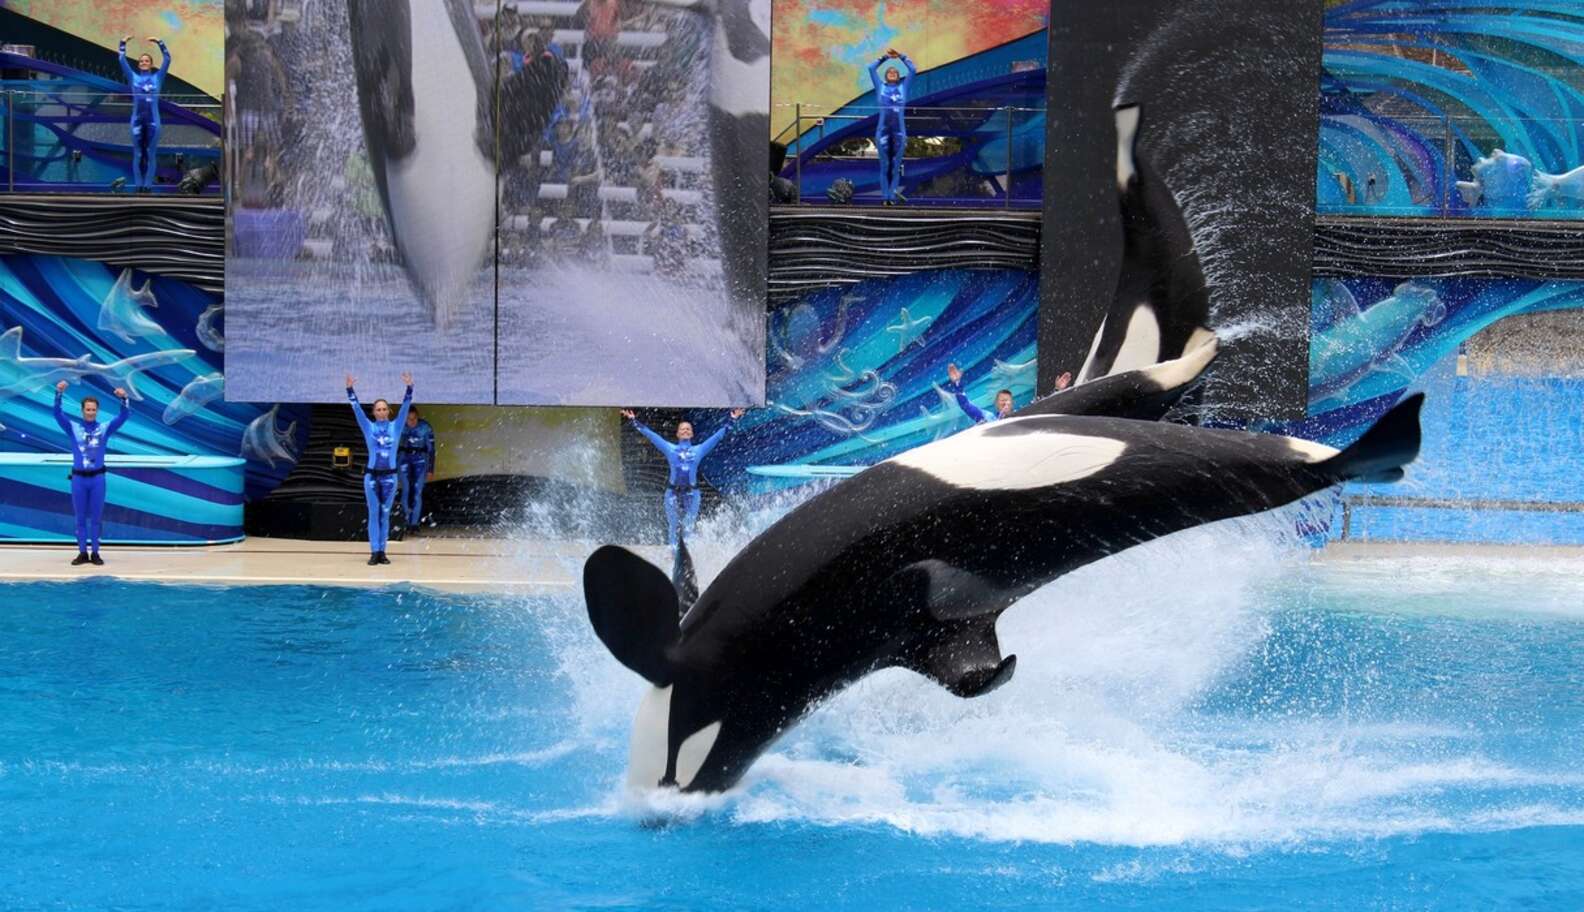 SeaWorld Gives The Most Absurd Reason For Not Freeing Its Orcas - The Dodo